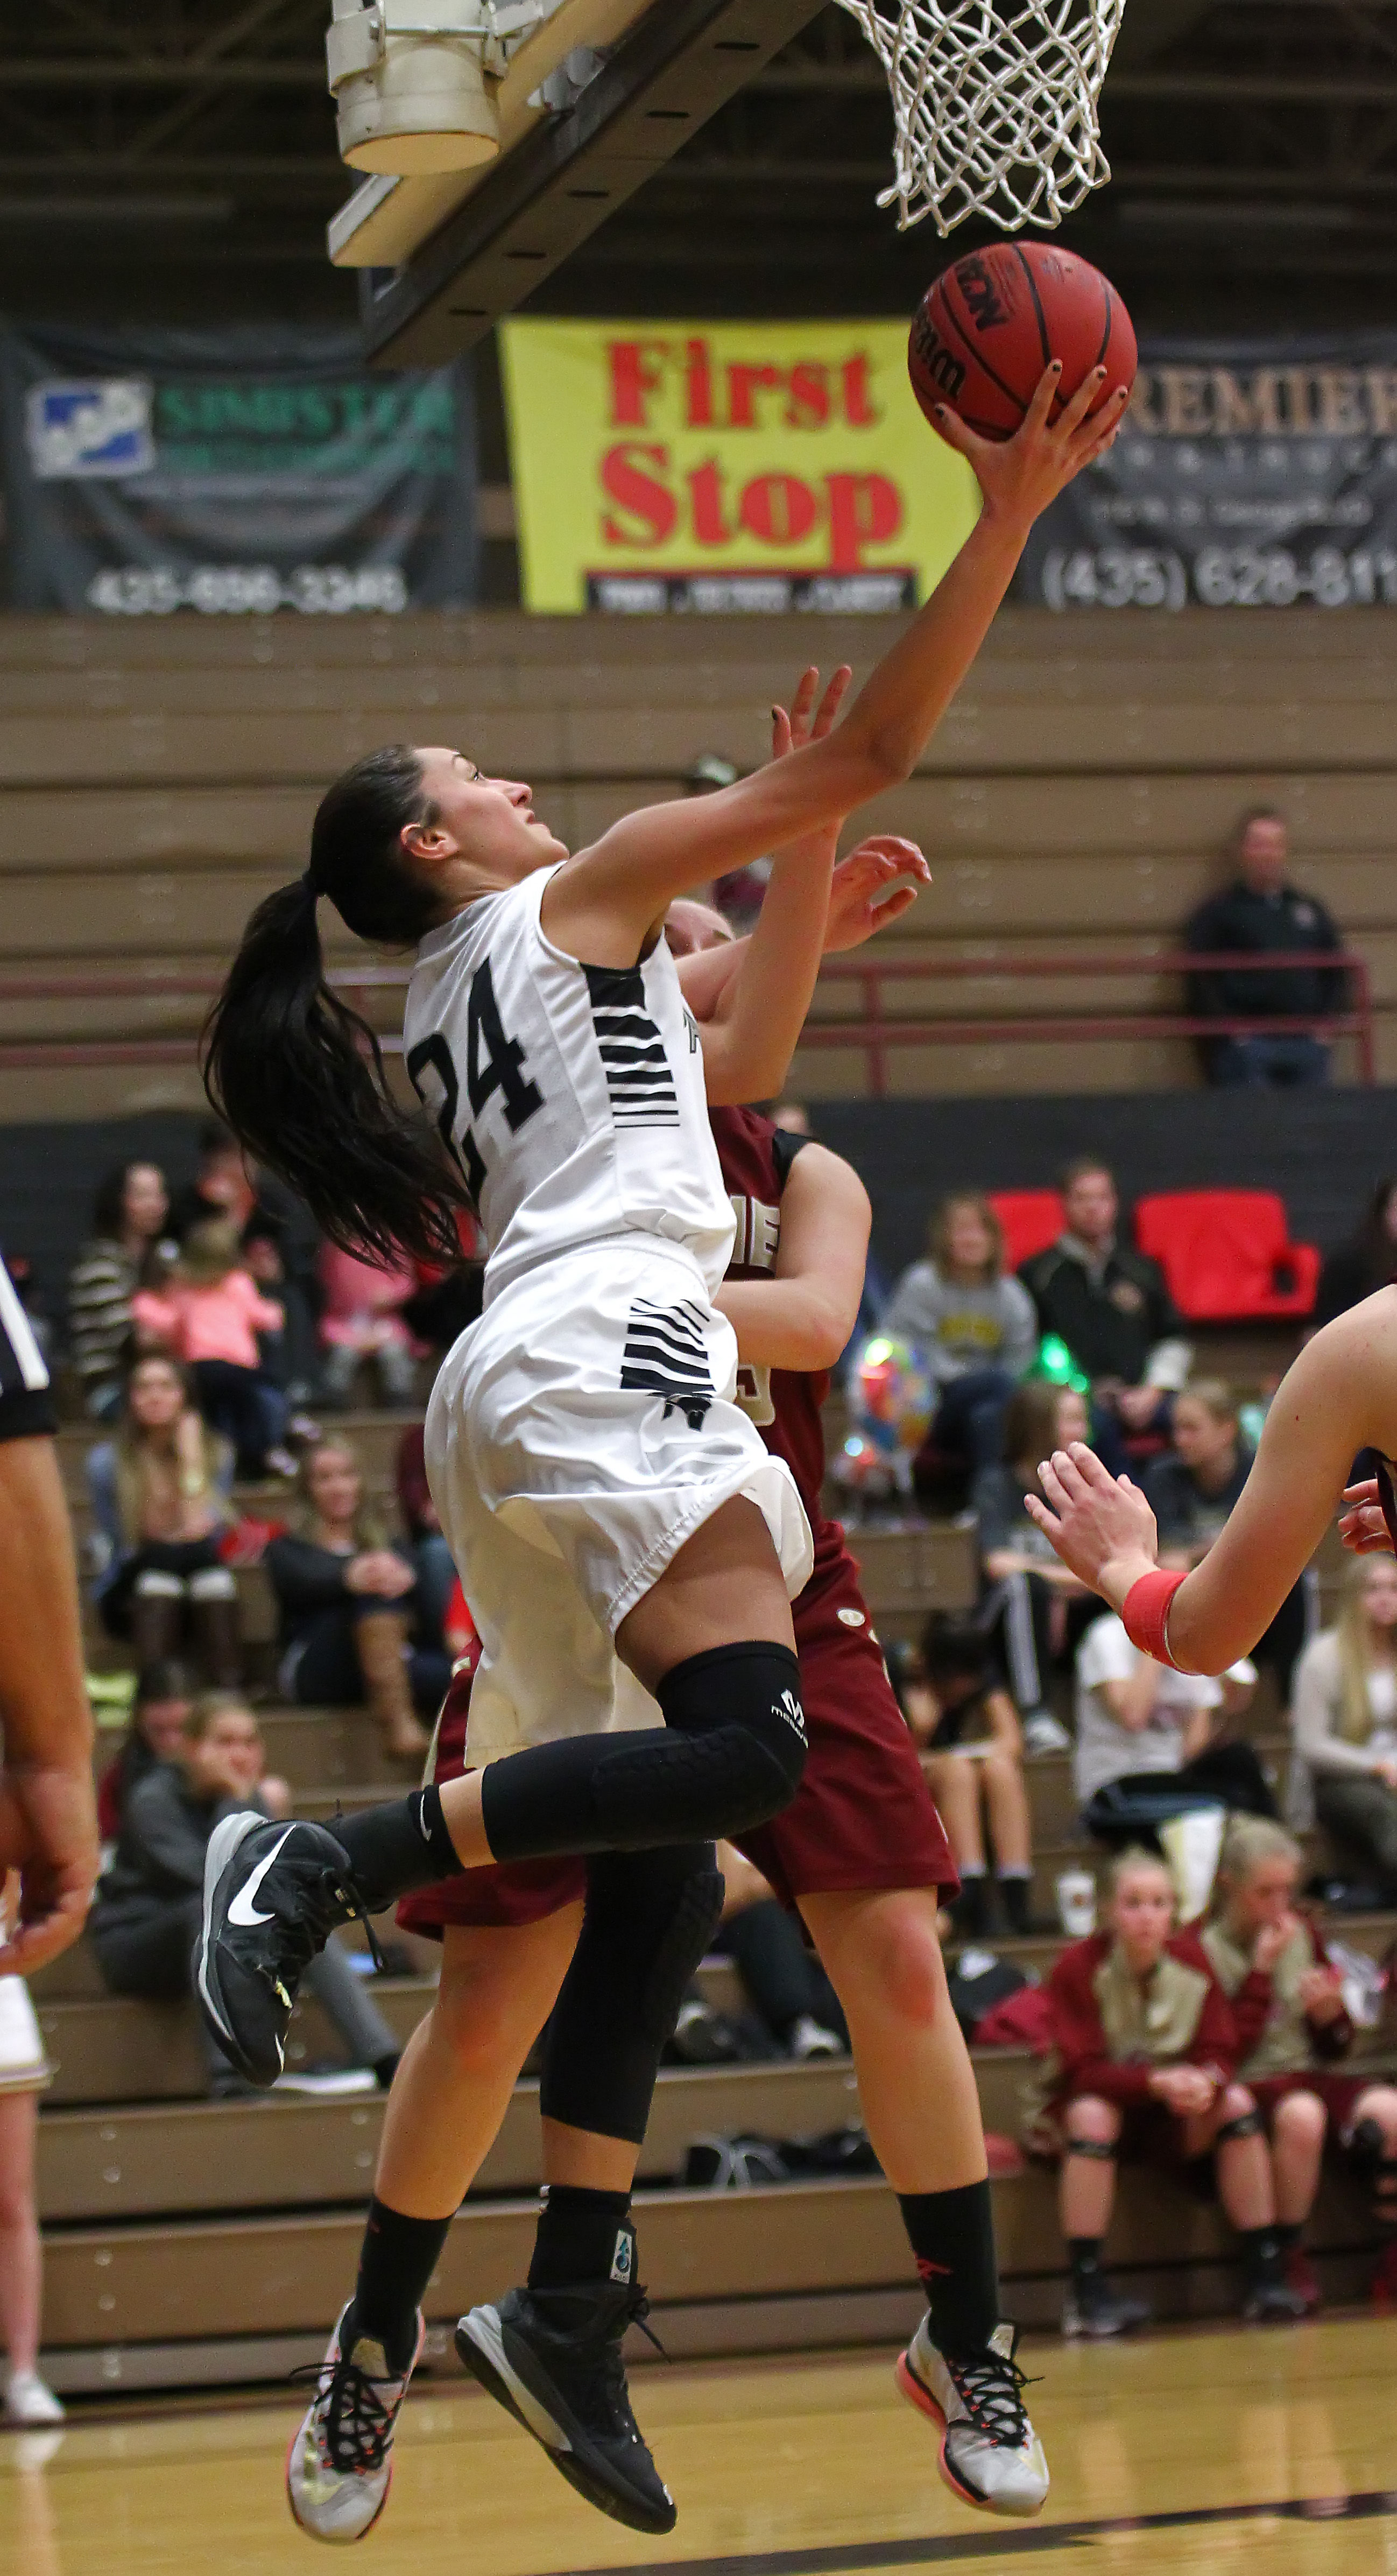 Girls hoops roundup: Lady Reds sit alone atop Region 9 after close win over PV – St ...2596 x 4786